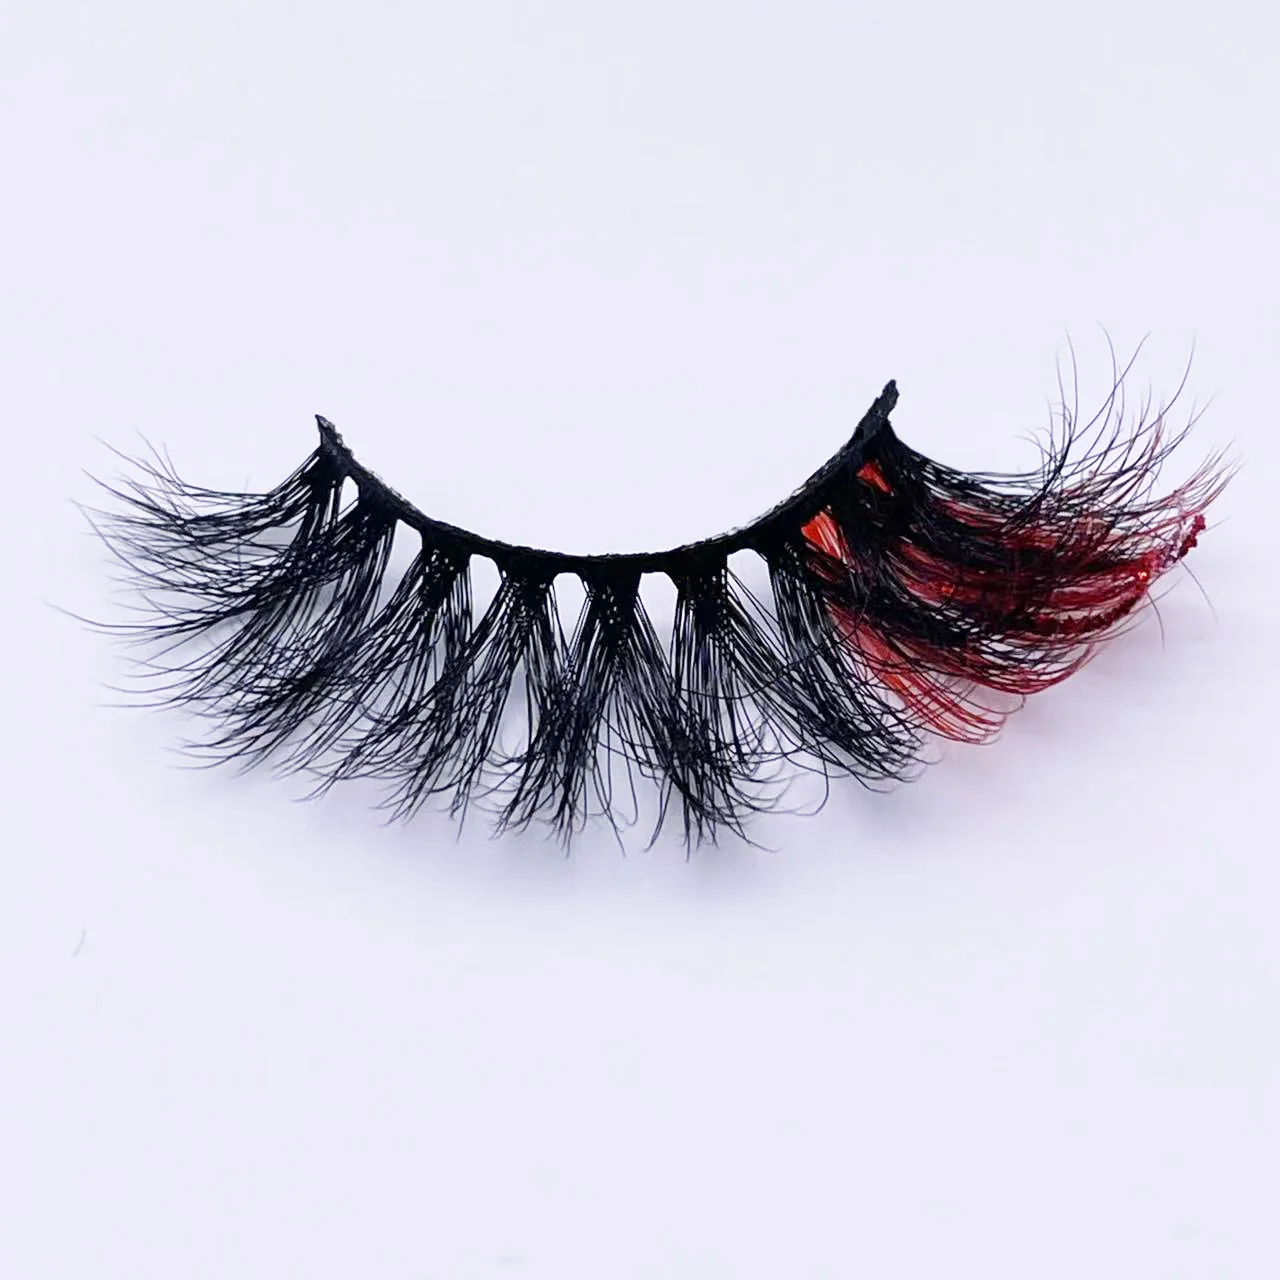 Hbzgtlad Colored Lashes Glitter Mink 15mm -20mm Fluffy Color Streaks Cosplay Makeup Beauty Eyelashes -Outlet Maid Outfit Store S279b79086e384826b2498d4bca7f9423V.jpg